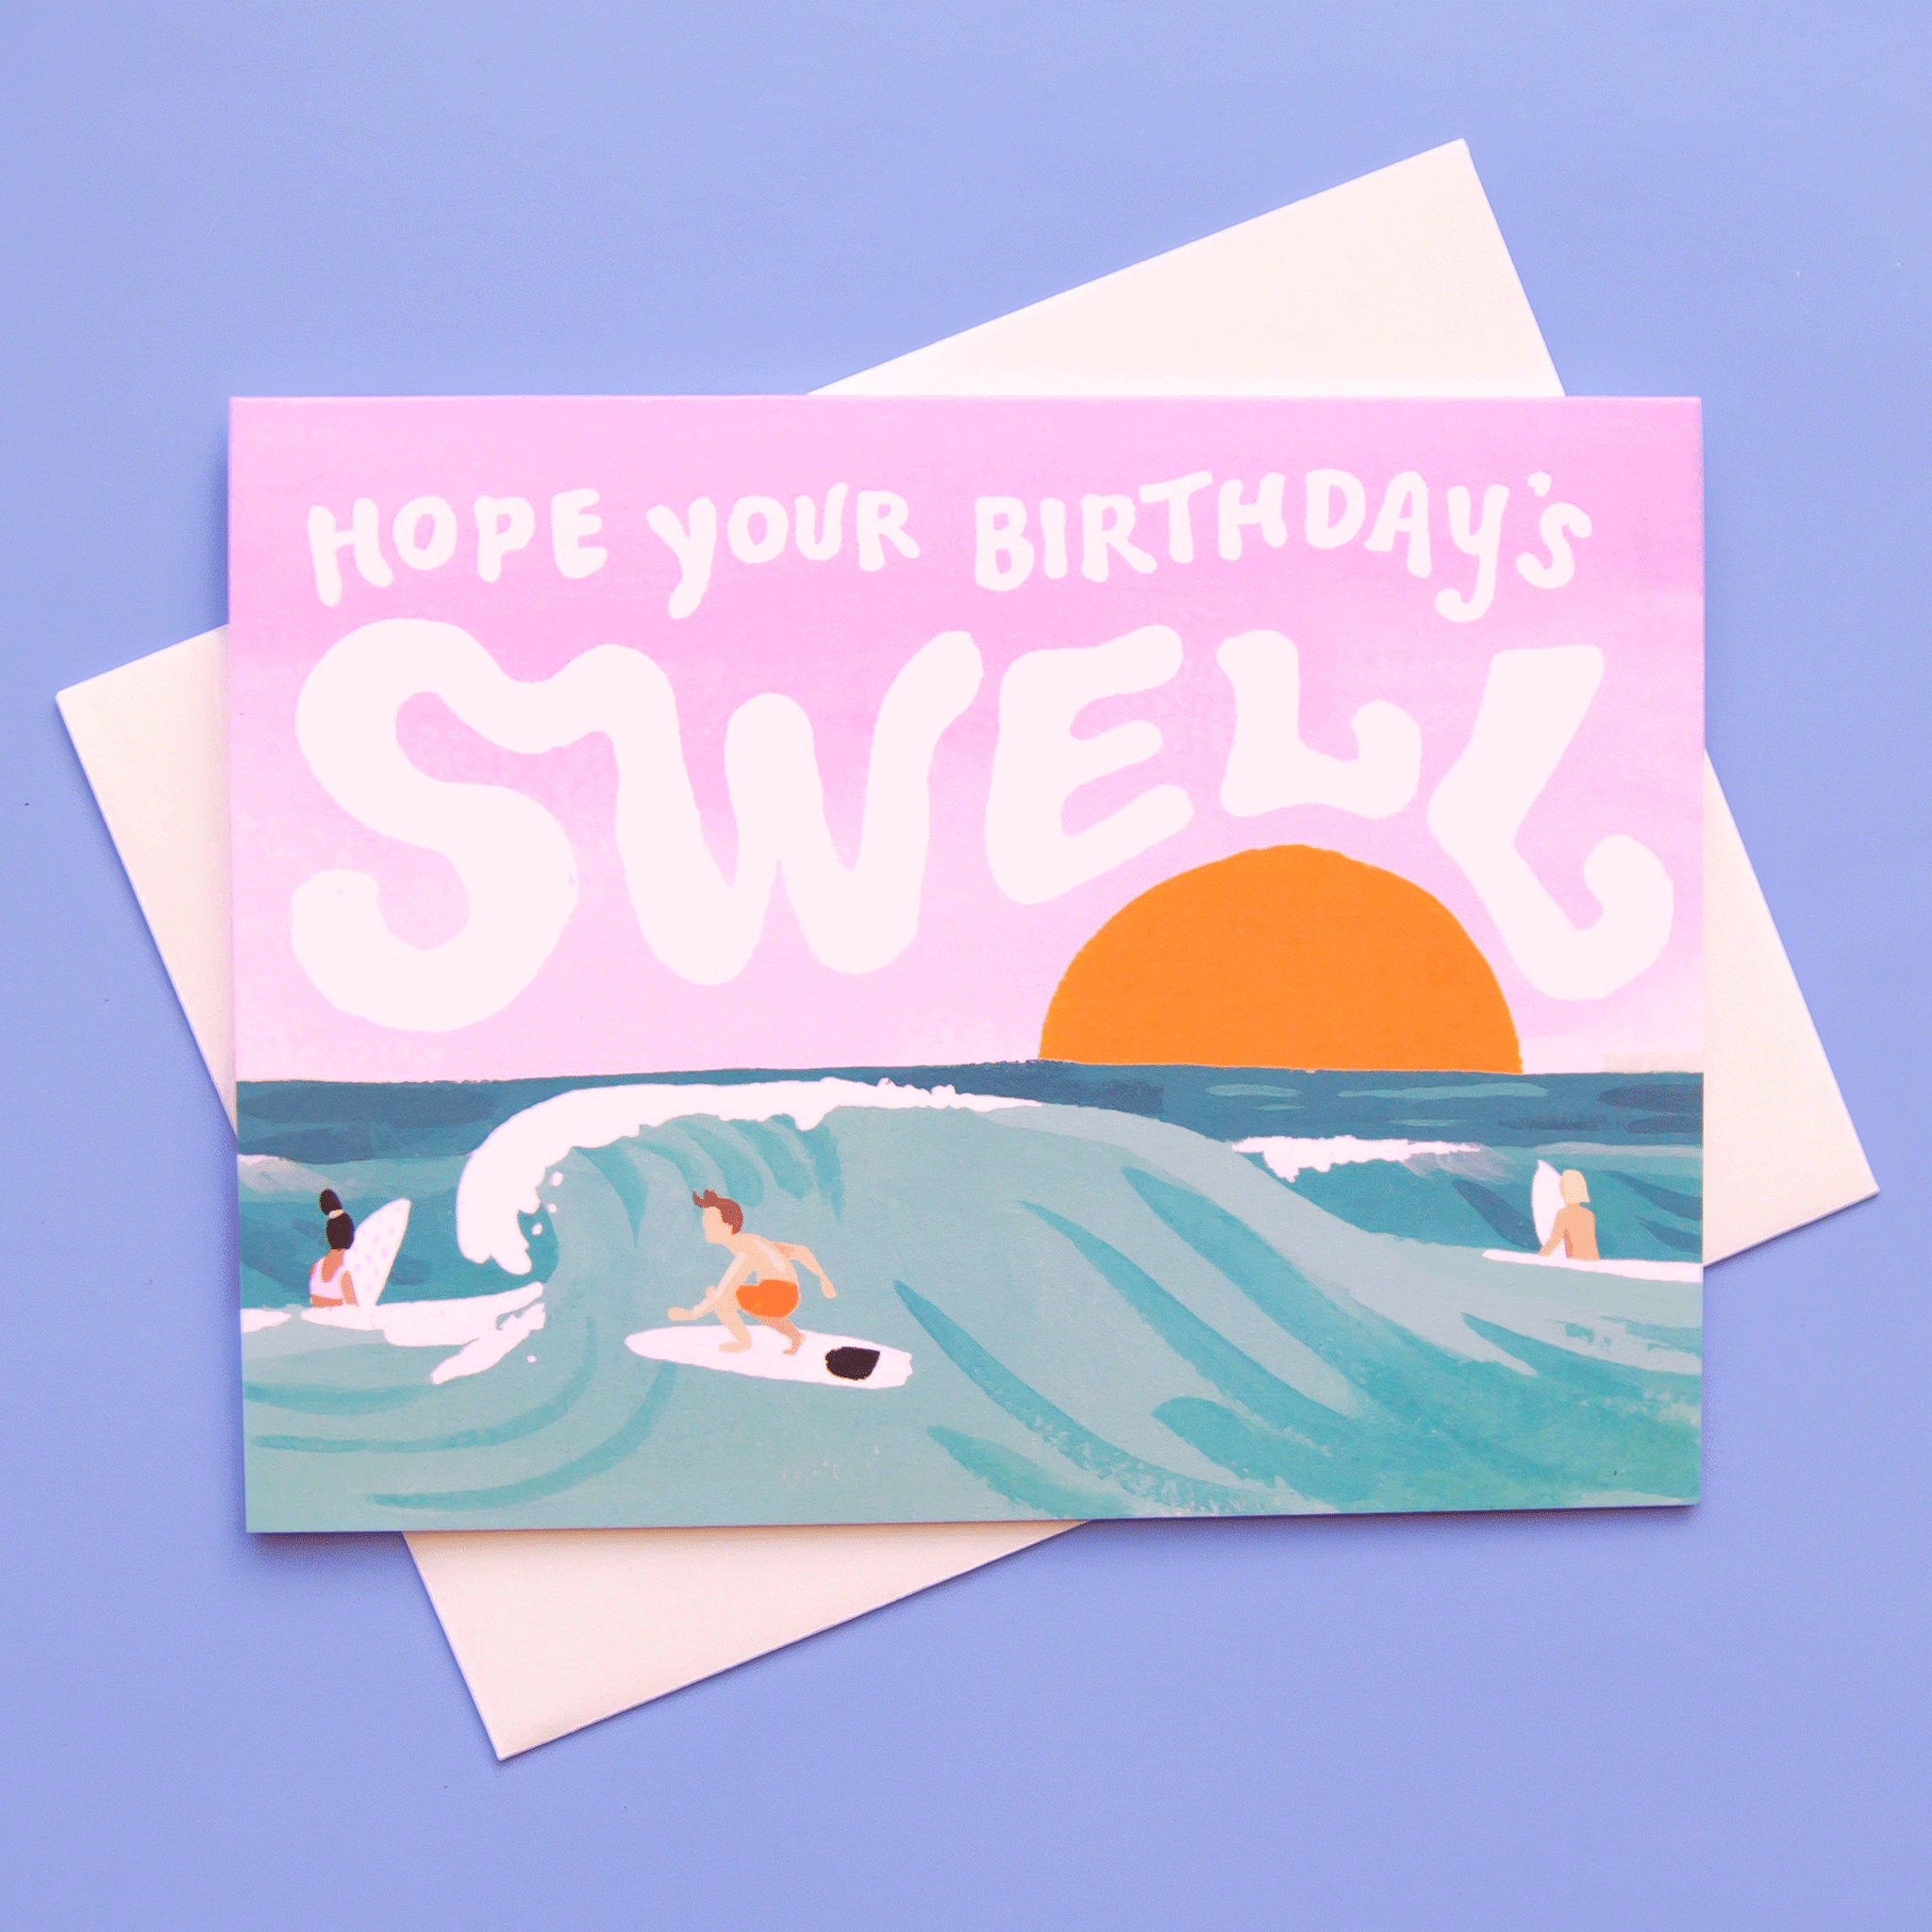 On top of a white envelope is a horizontal card. The card is a drawing of a blue ocean with a wave and a person surfing the wave. Behind the ocean is a purple sky with a yellow, setting sun. In the sky is white text that reads ‘hope your birthday’s swell.’